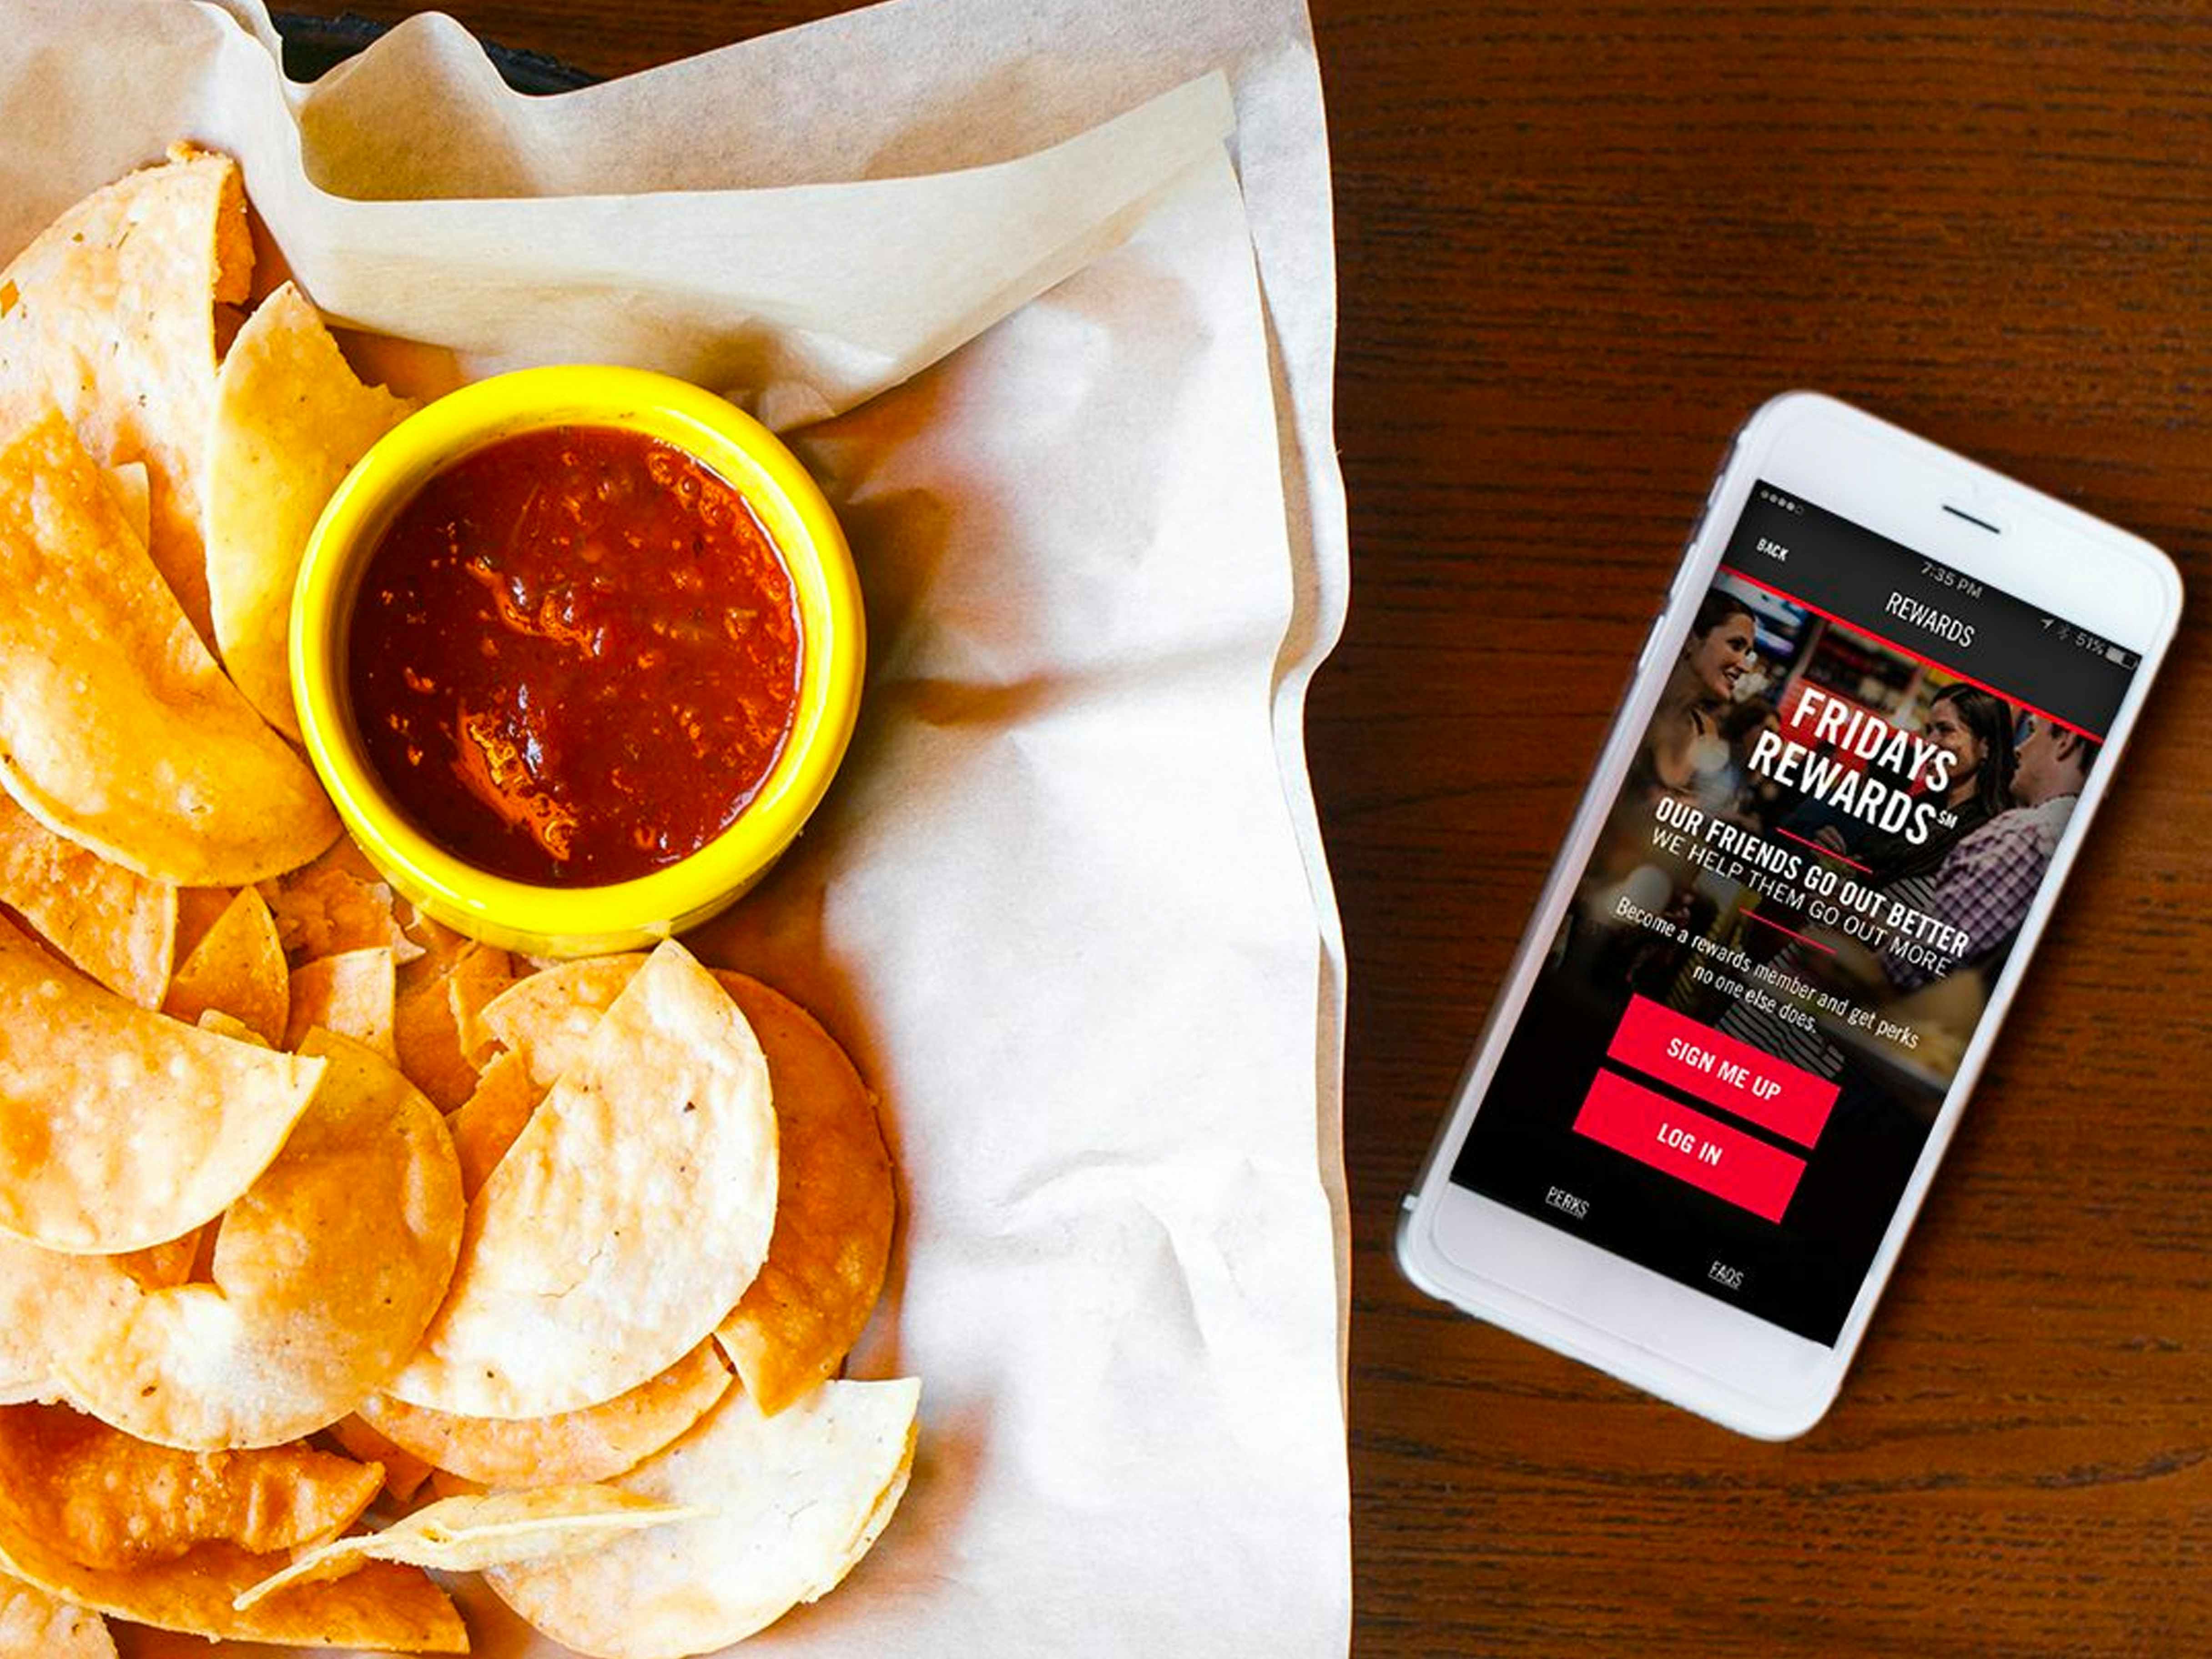 Plate of chips and salsa with a cell phone on a wooden table